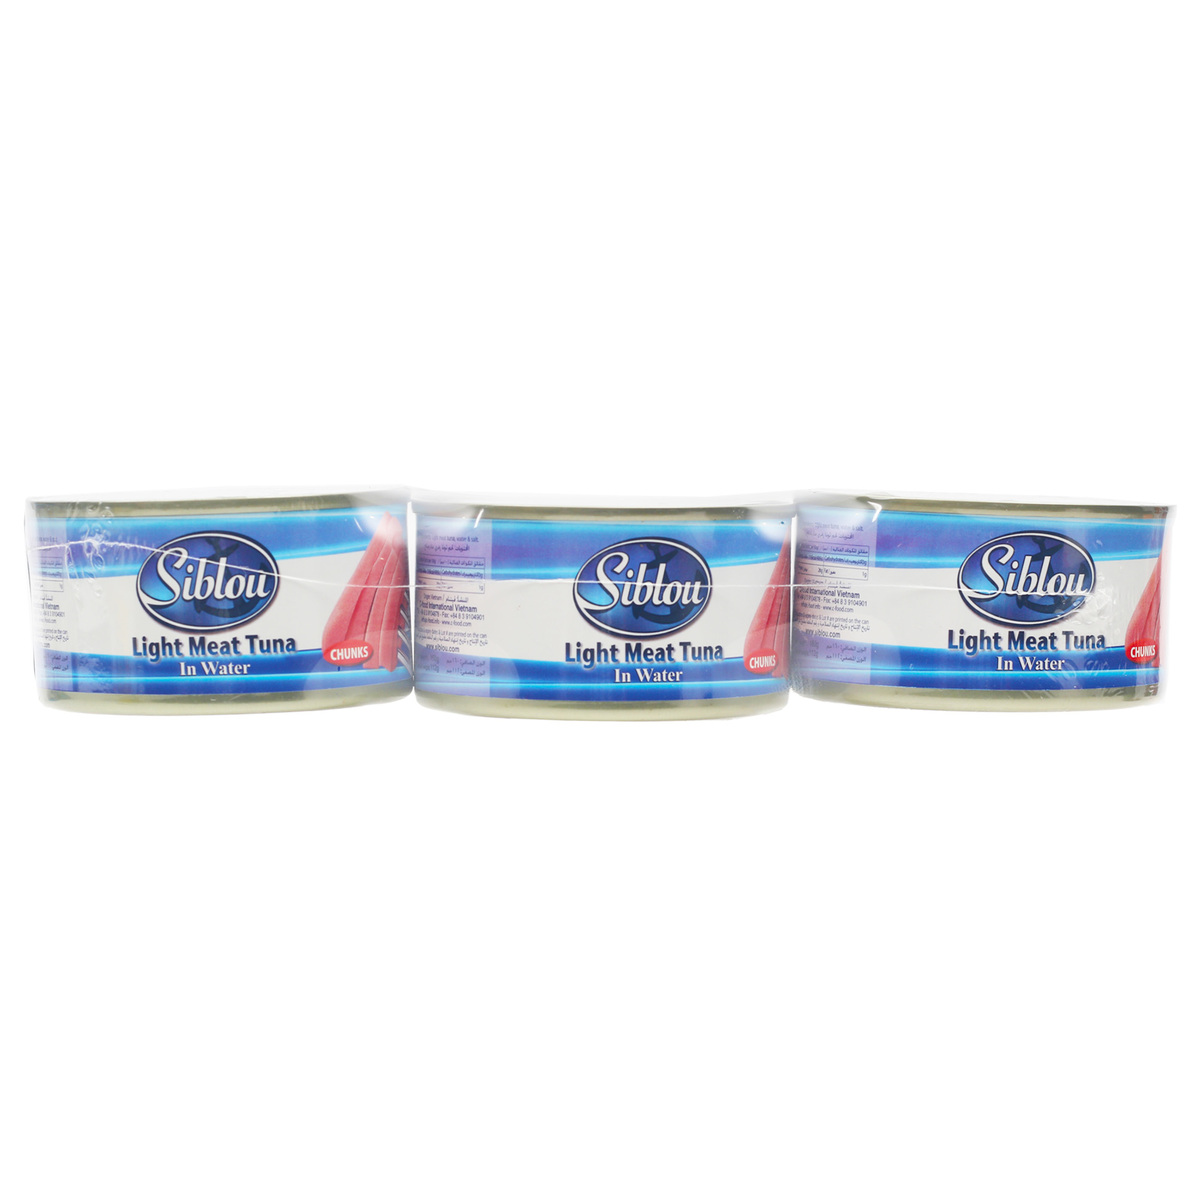 Siblou Light Meat Tuna Chunks Assorted Value Pack 3 x 160 g